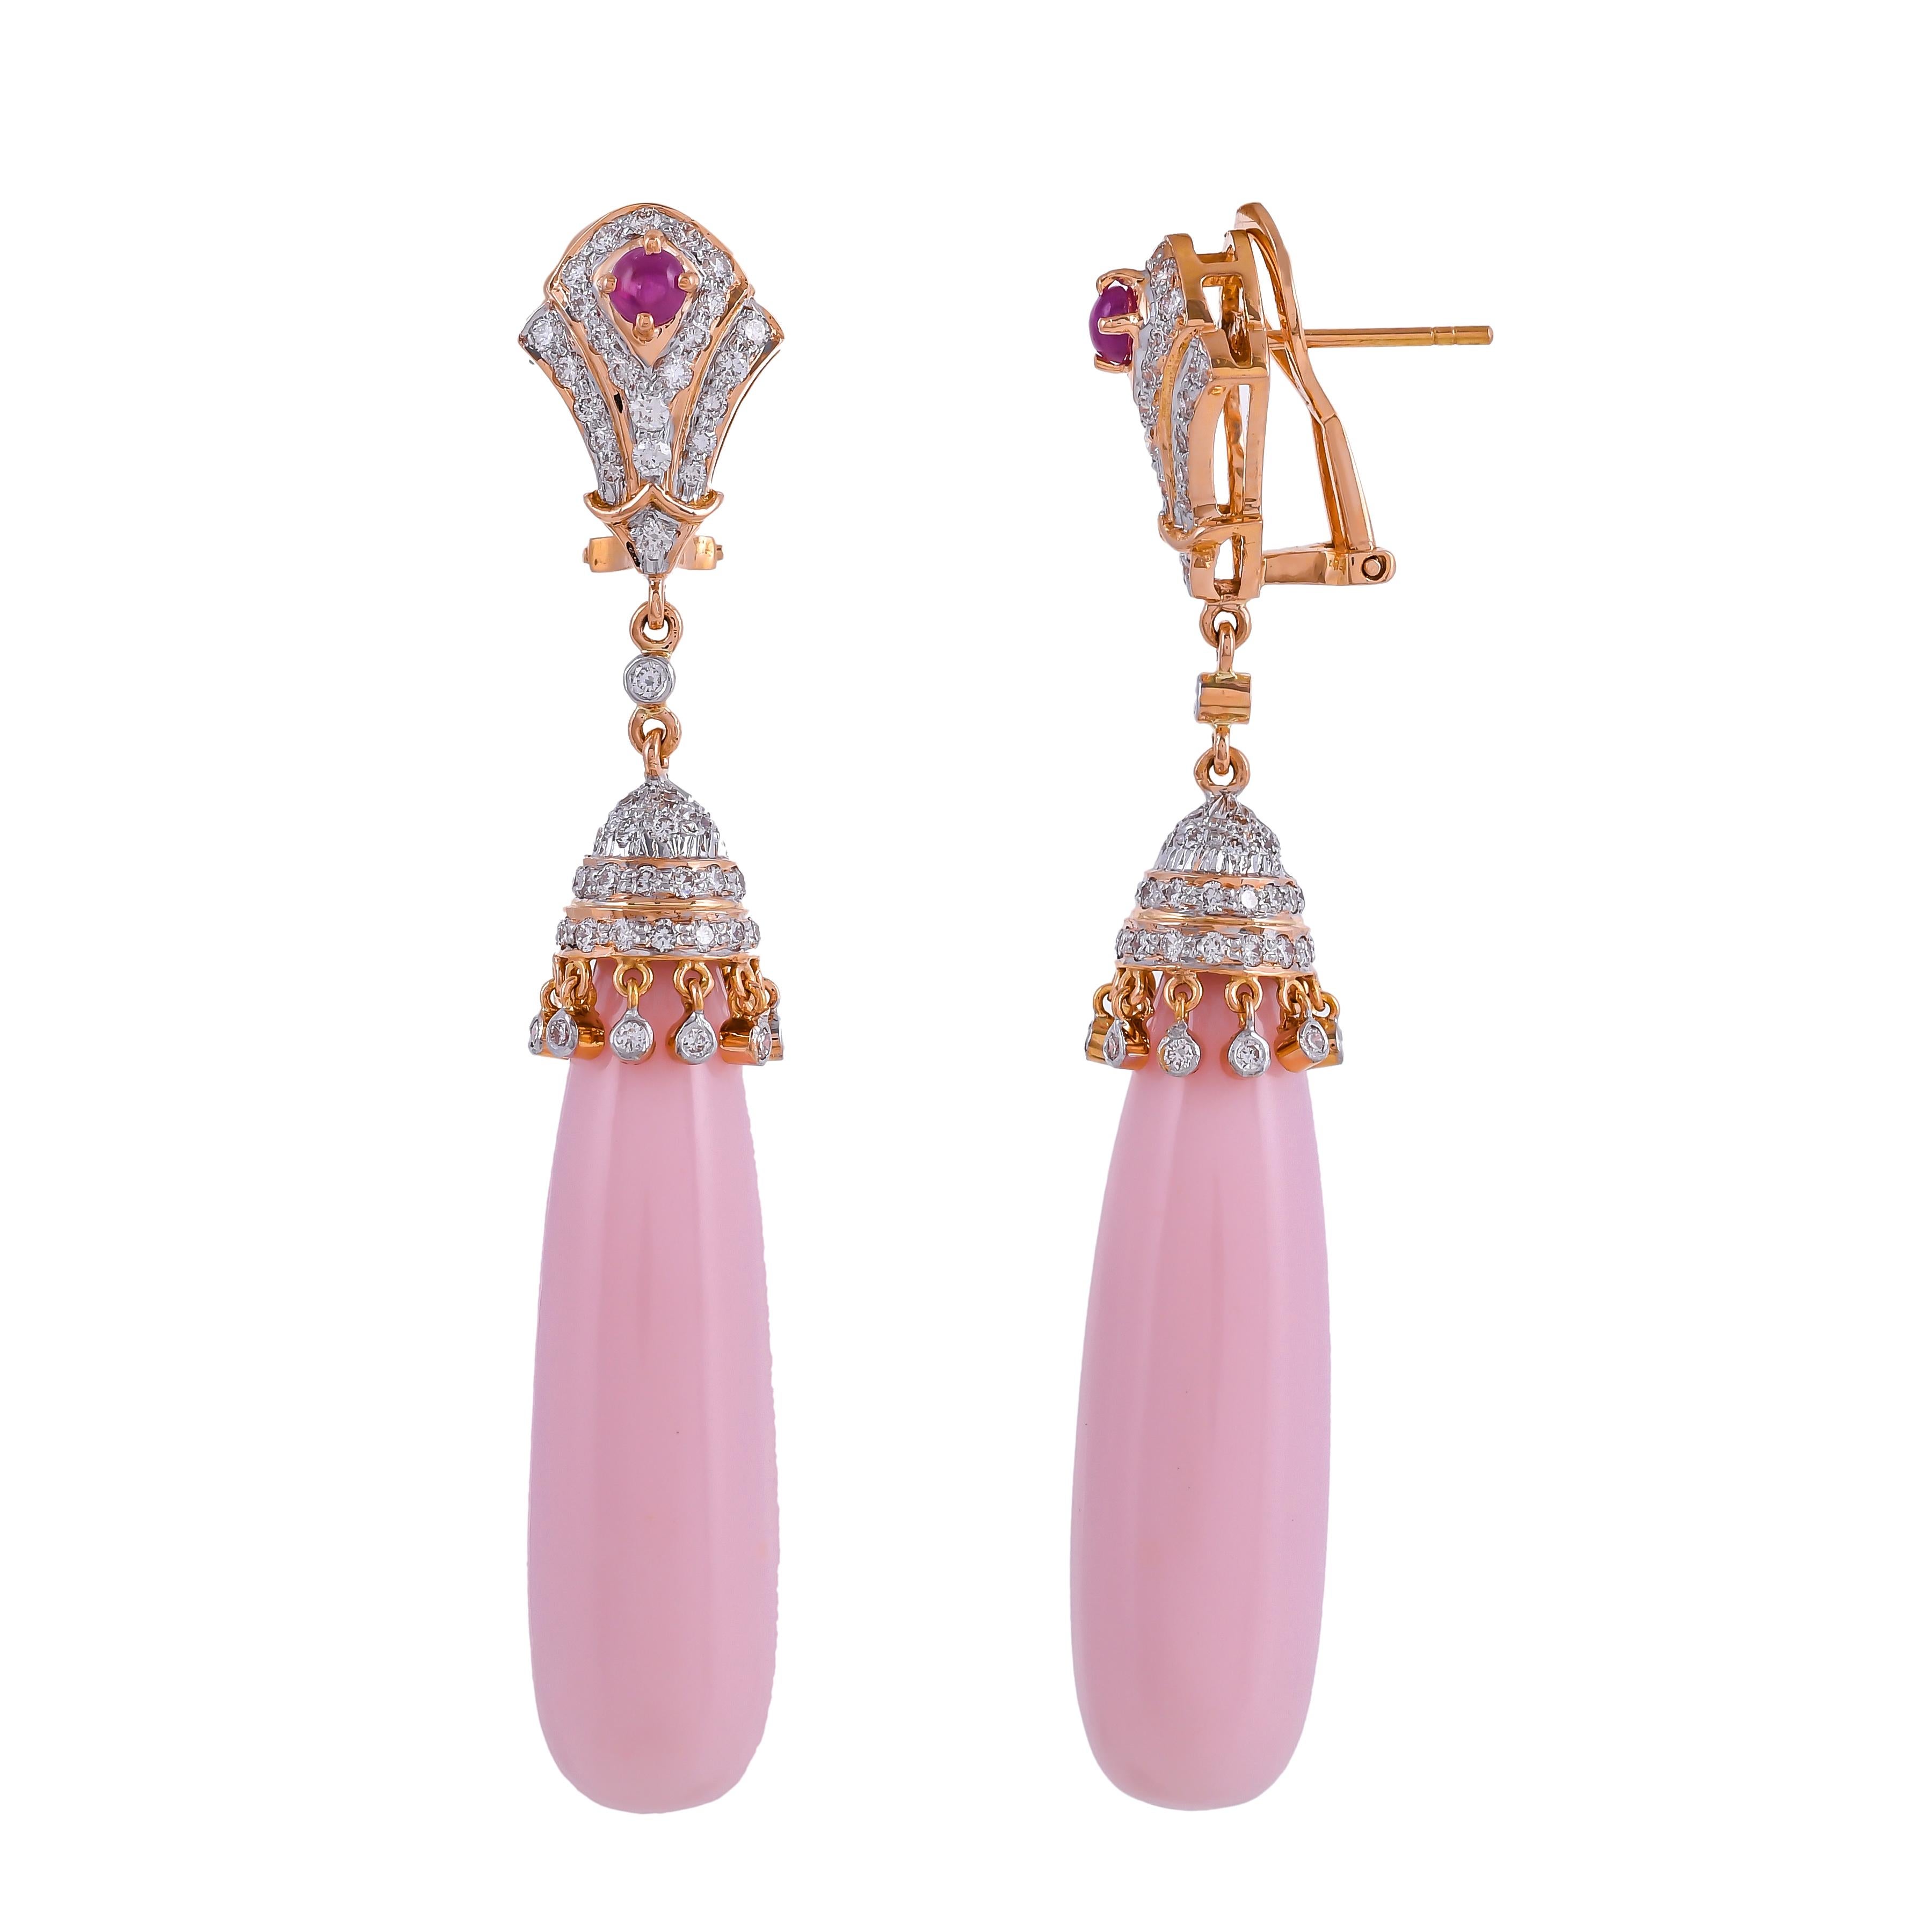 This elegant pair of earrings features 0.49 carats ruby surrounded by pave set 2.07 carats white diamonds further decorated with 64.66 carats pink opal teardrops from the dangling diamond-set cap, mounted in 18 karats yellow gold. Modern style with